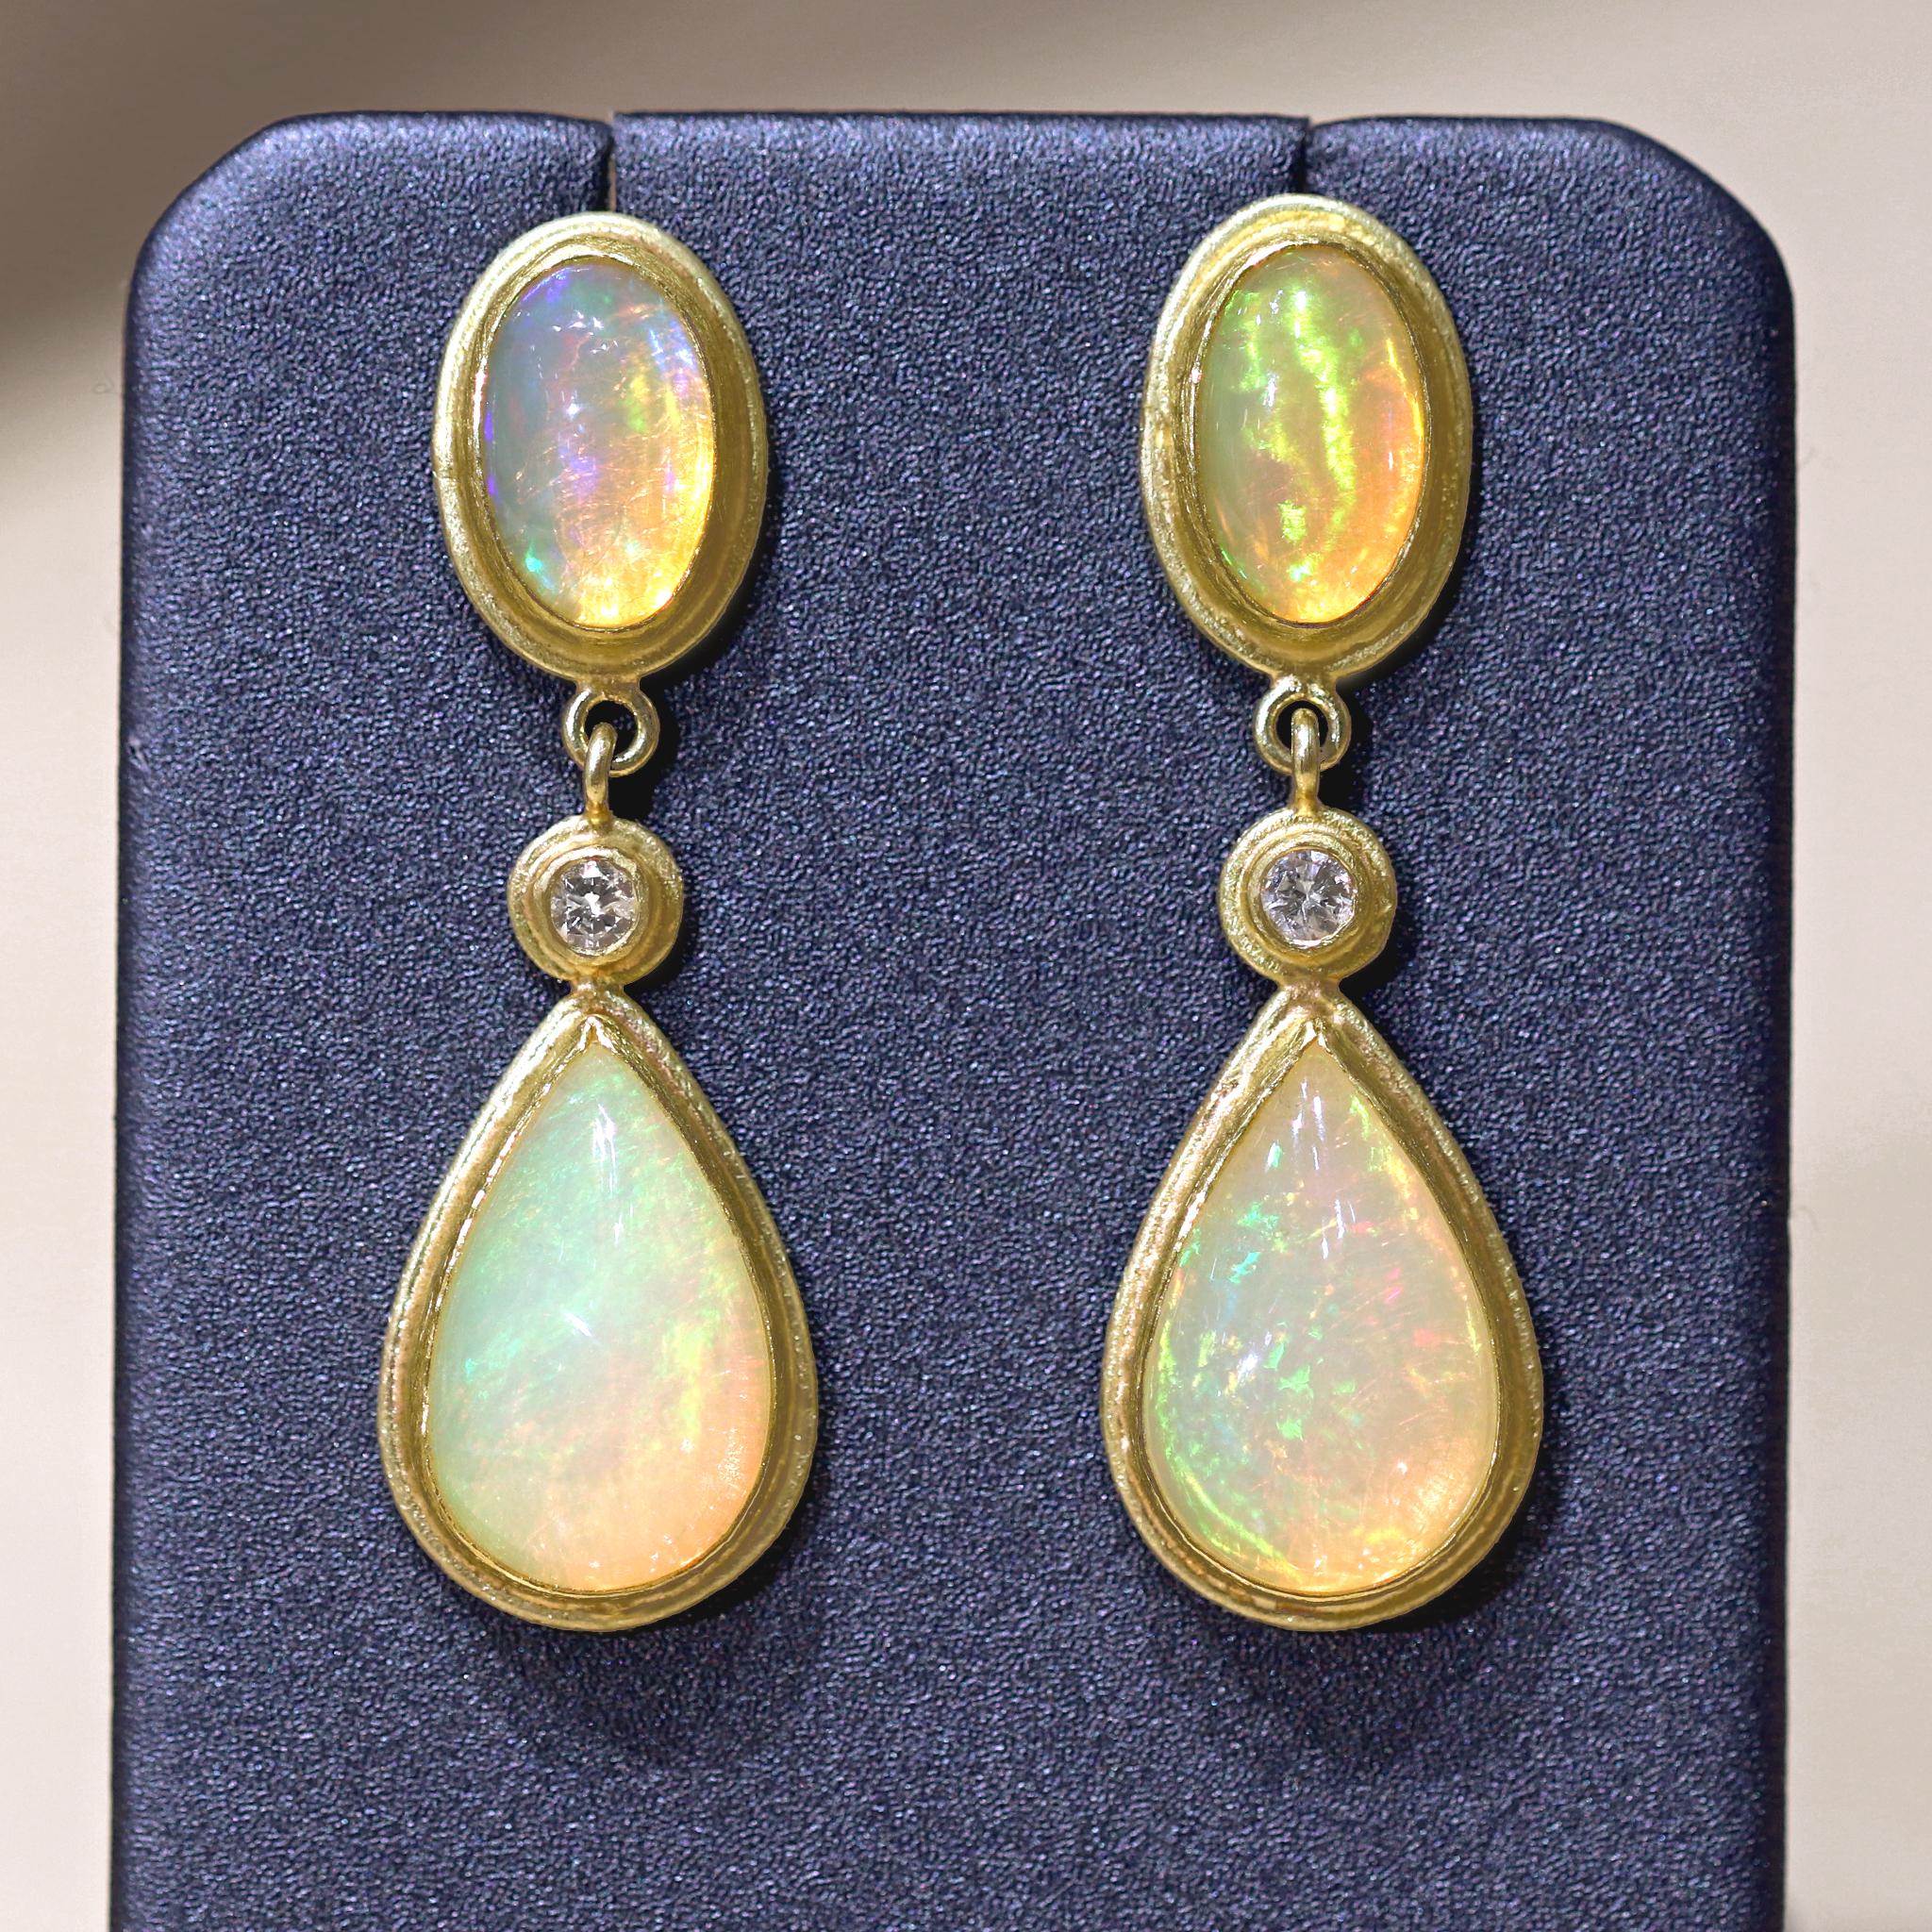 One of a Kind Fiery Ethiopian Opal and Diamond Drop Earrings hand-fabricated by jewelry maker Petra Class showcasing 6.5 total carats of beautifully matched, very fiery white opal cabochons and accented by round brilliant-cut white diamonds. Each